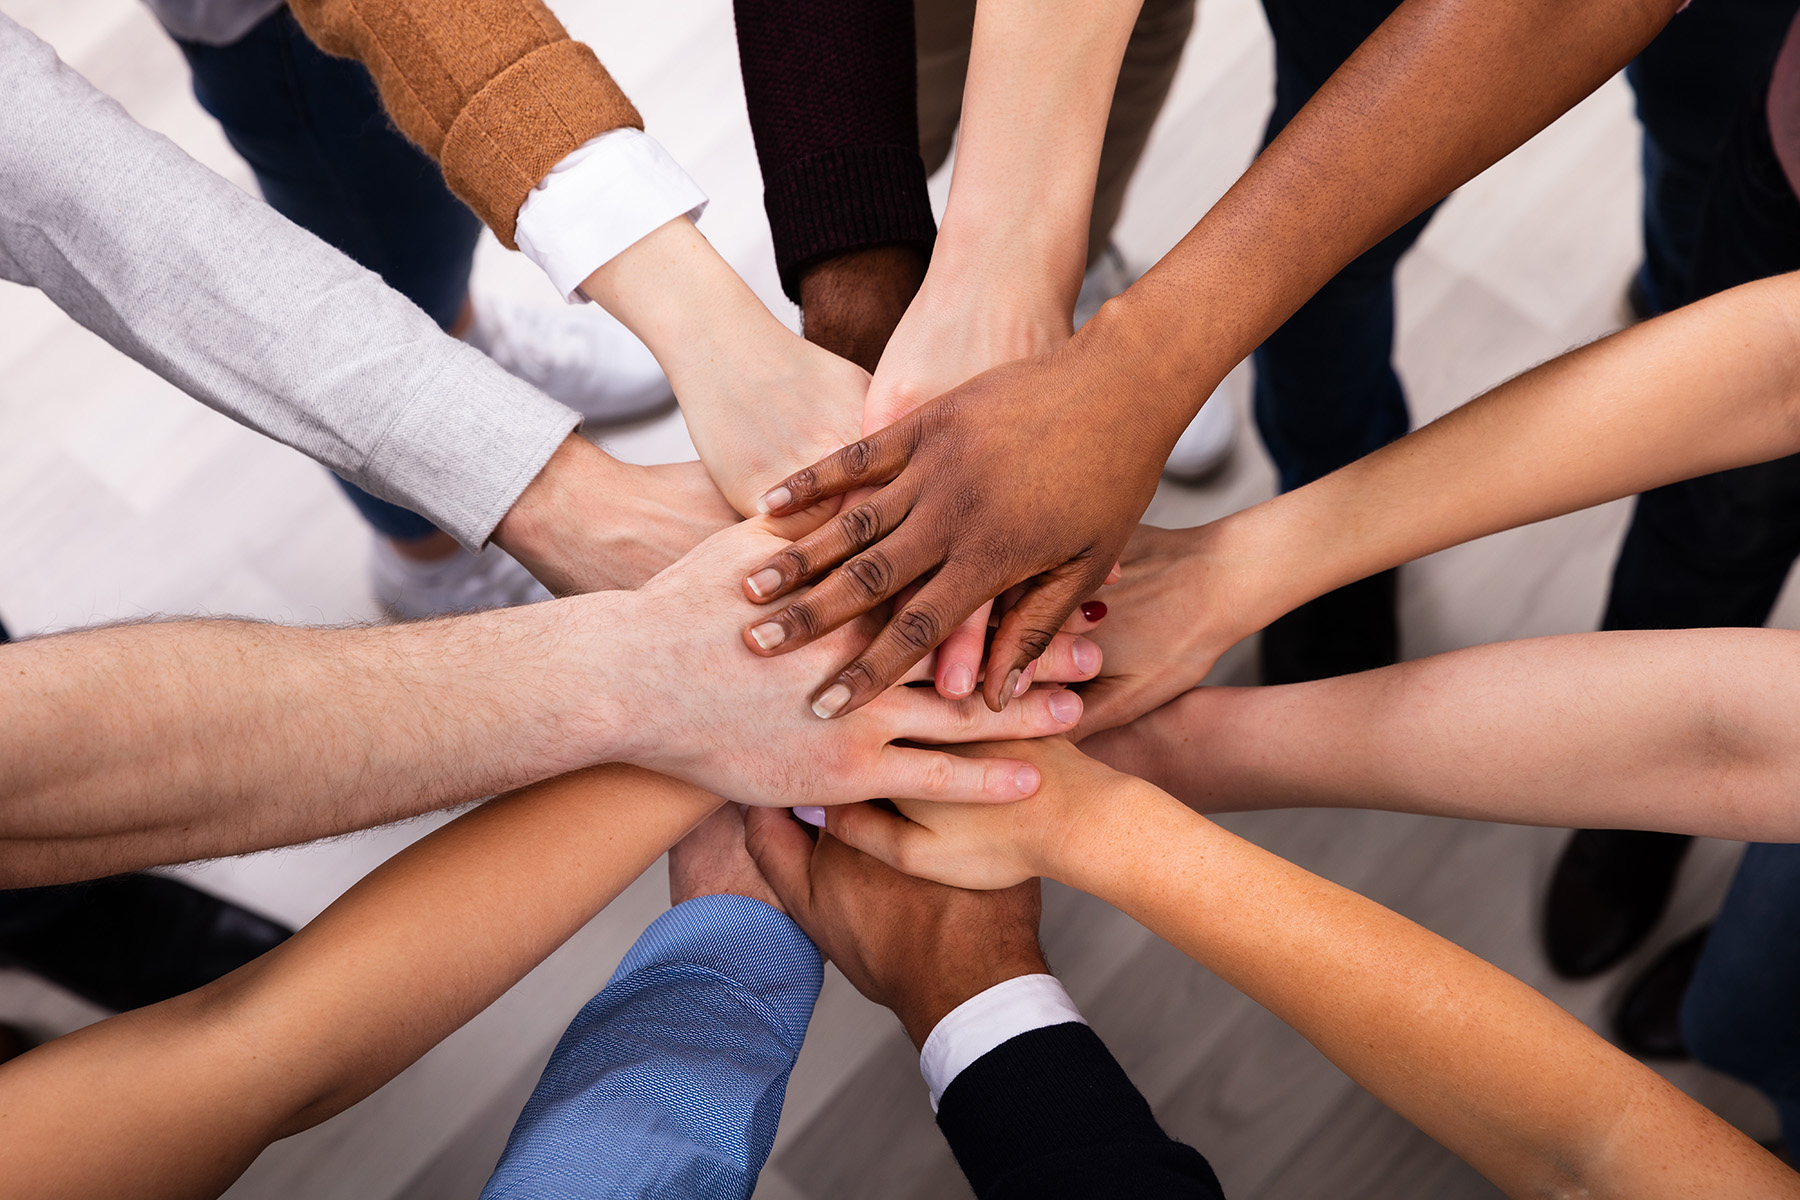 People of various skin tones stretch out their arms and place their hands on top of one another.